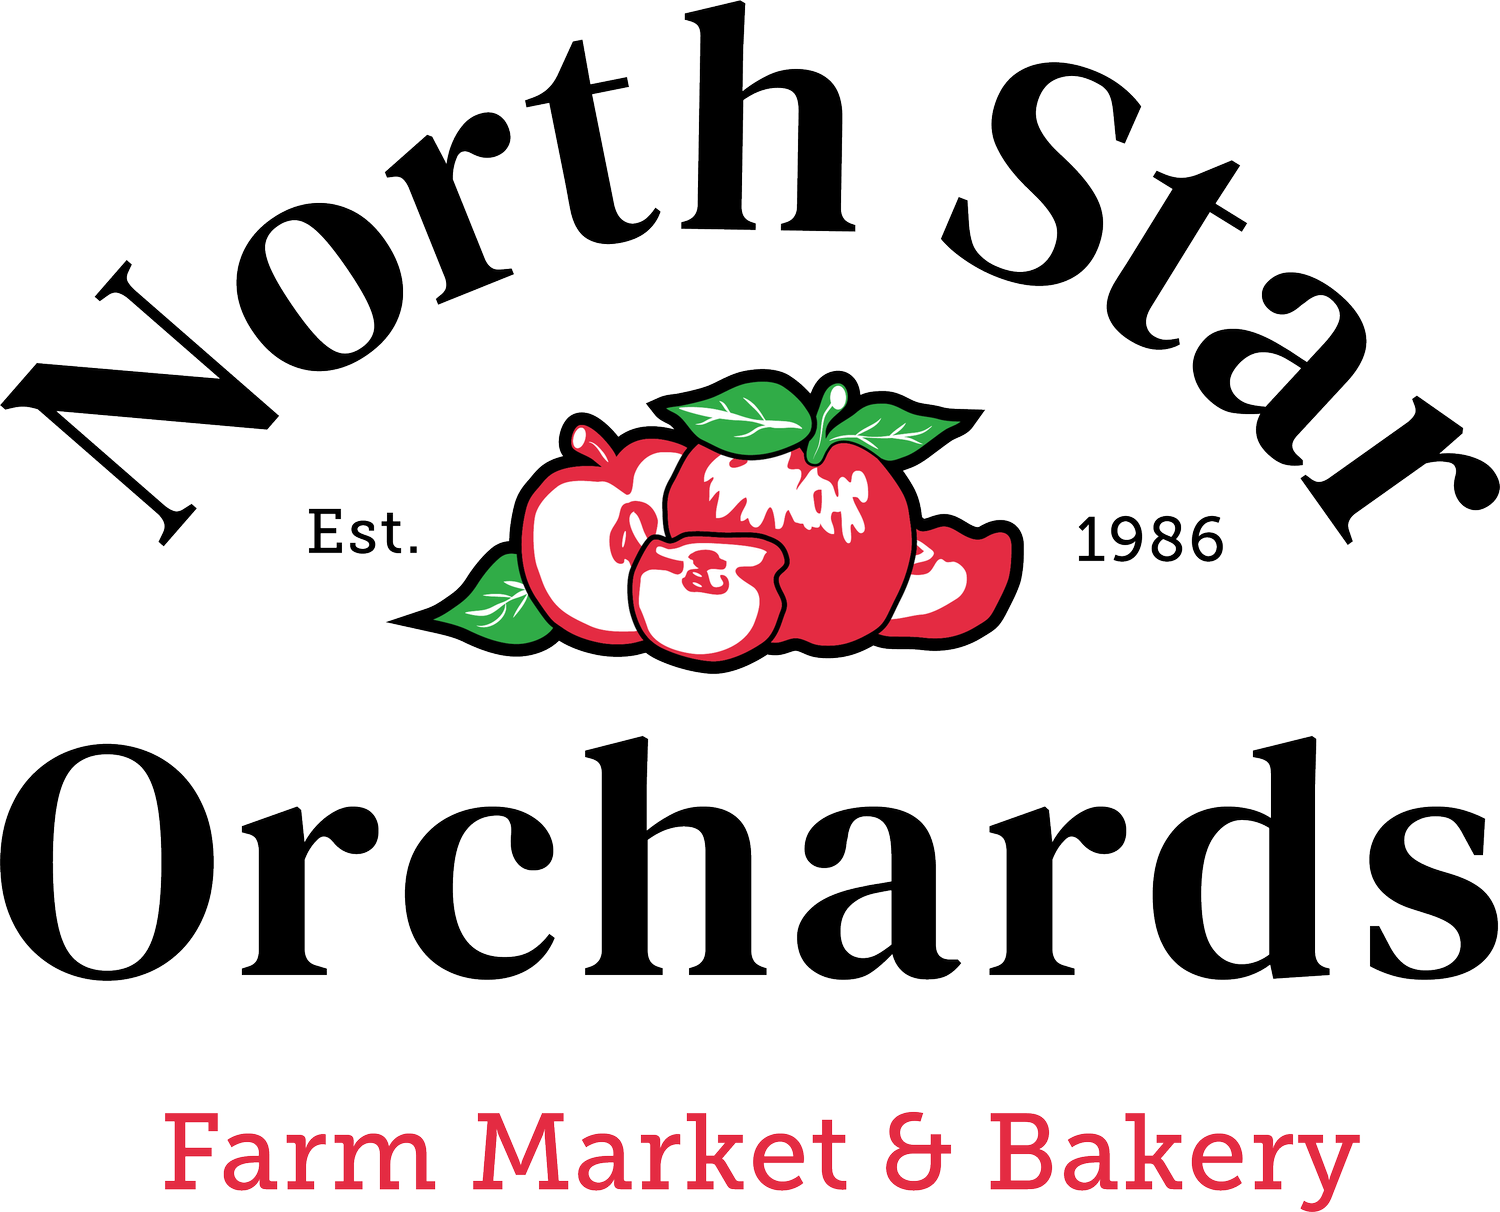 North Star Orchards